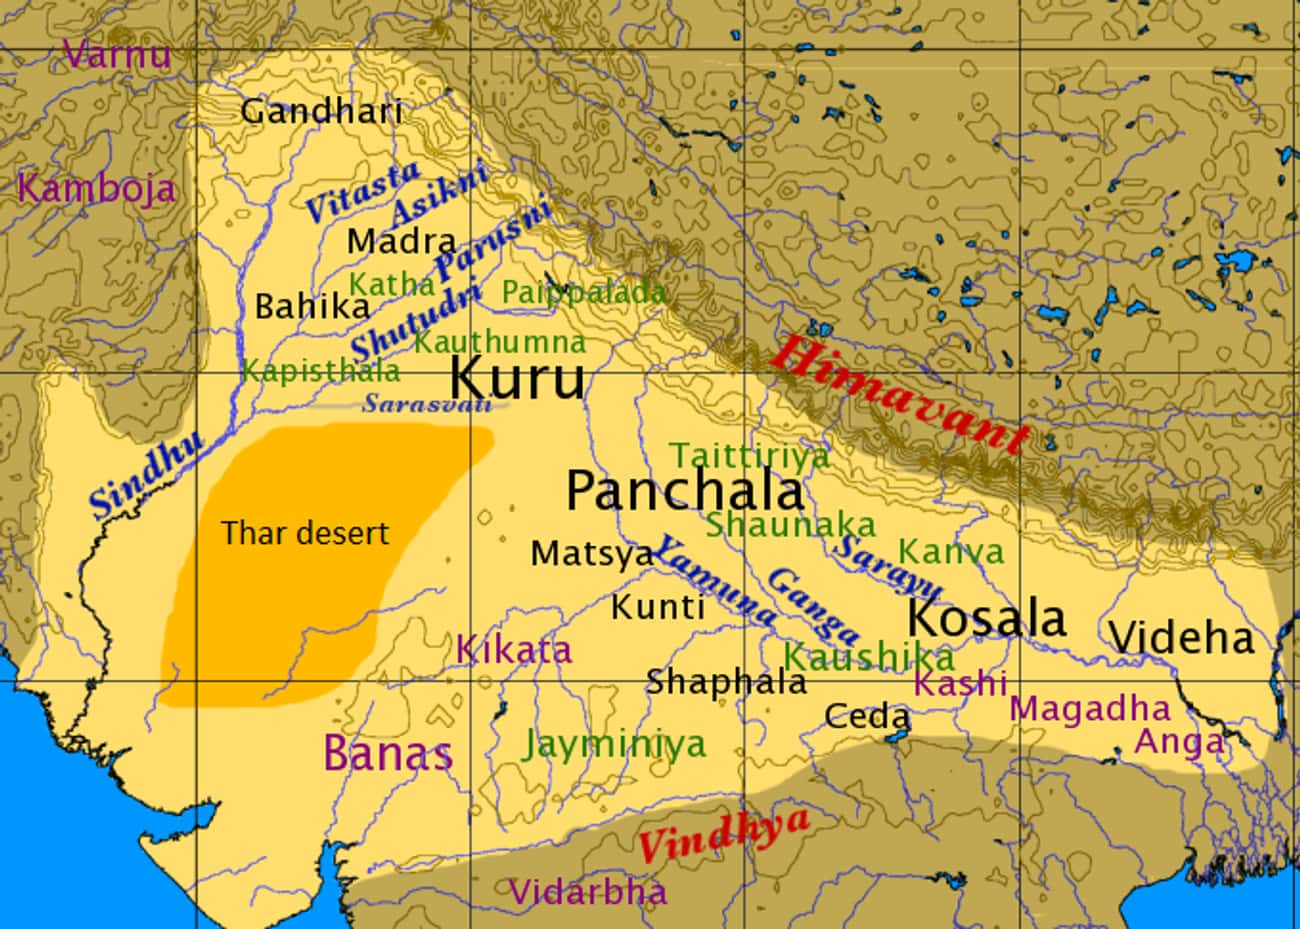 Northern India Was Populated By Aryans As Early As 1500 BCE